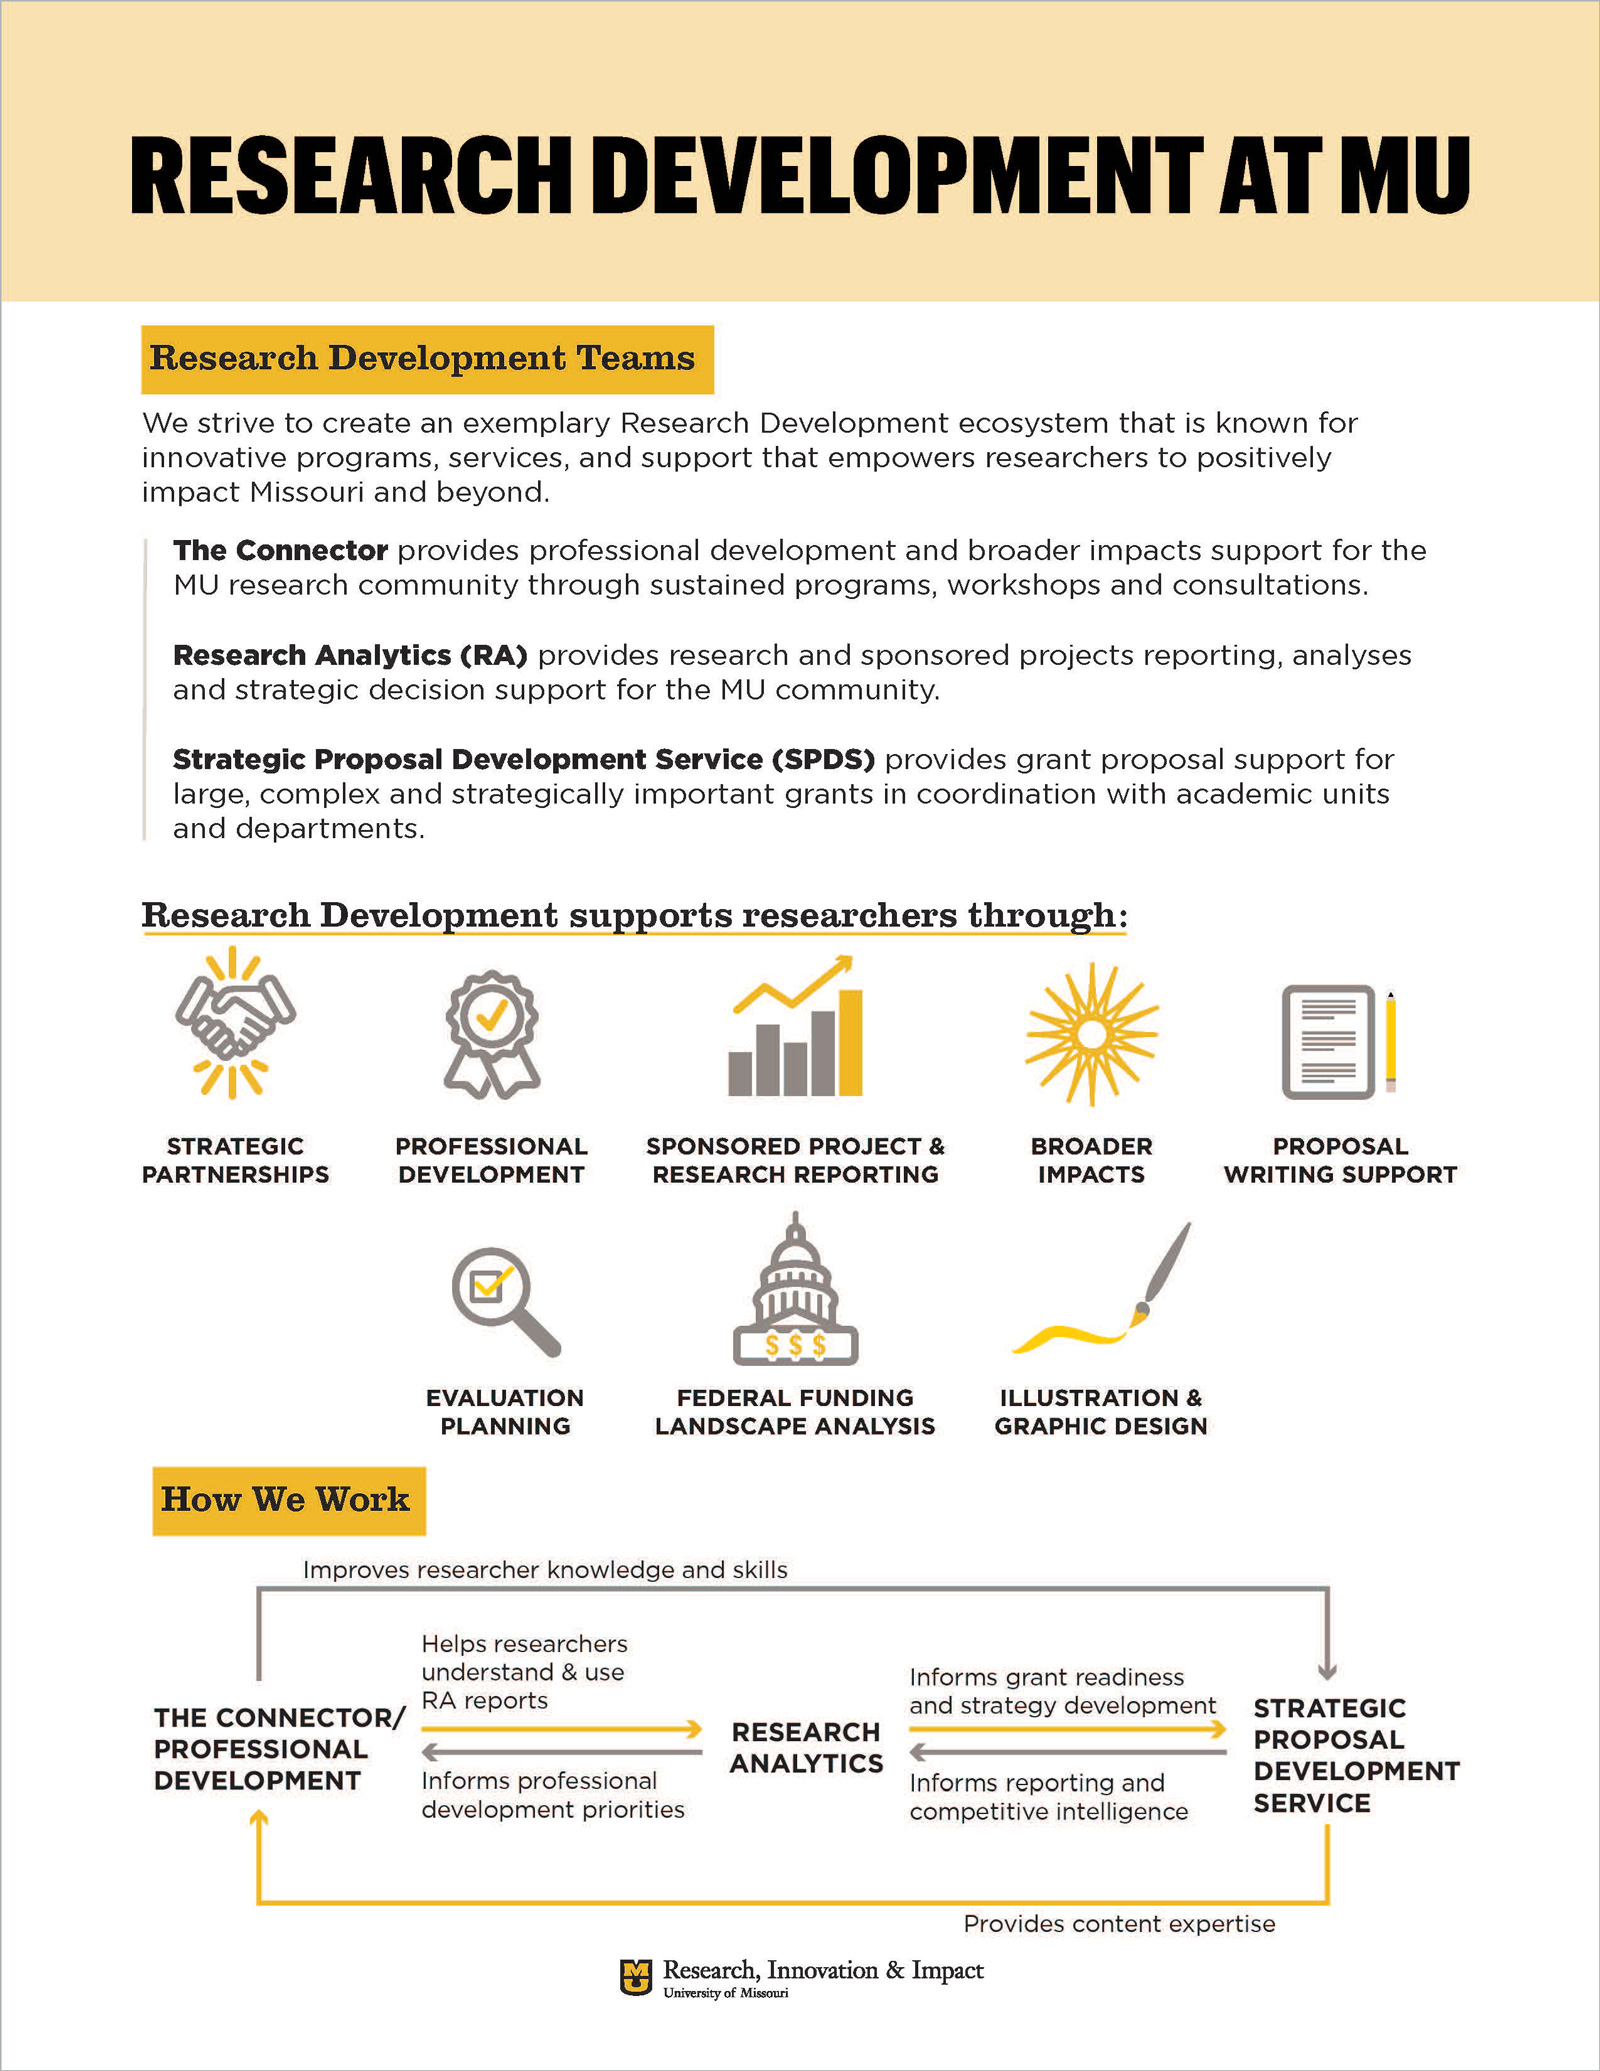 Overview Document of Research & Development at Mizzou